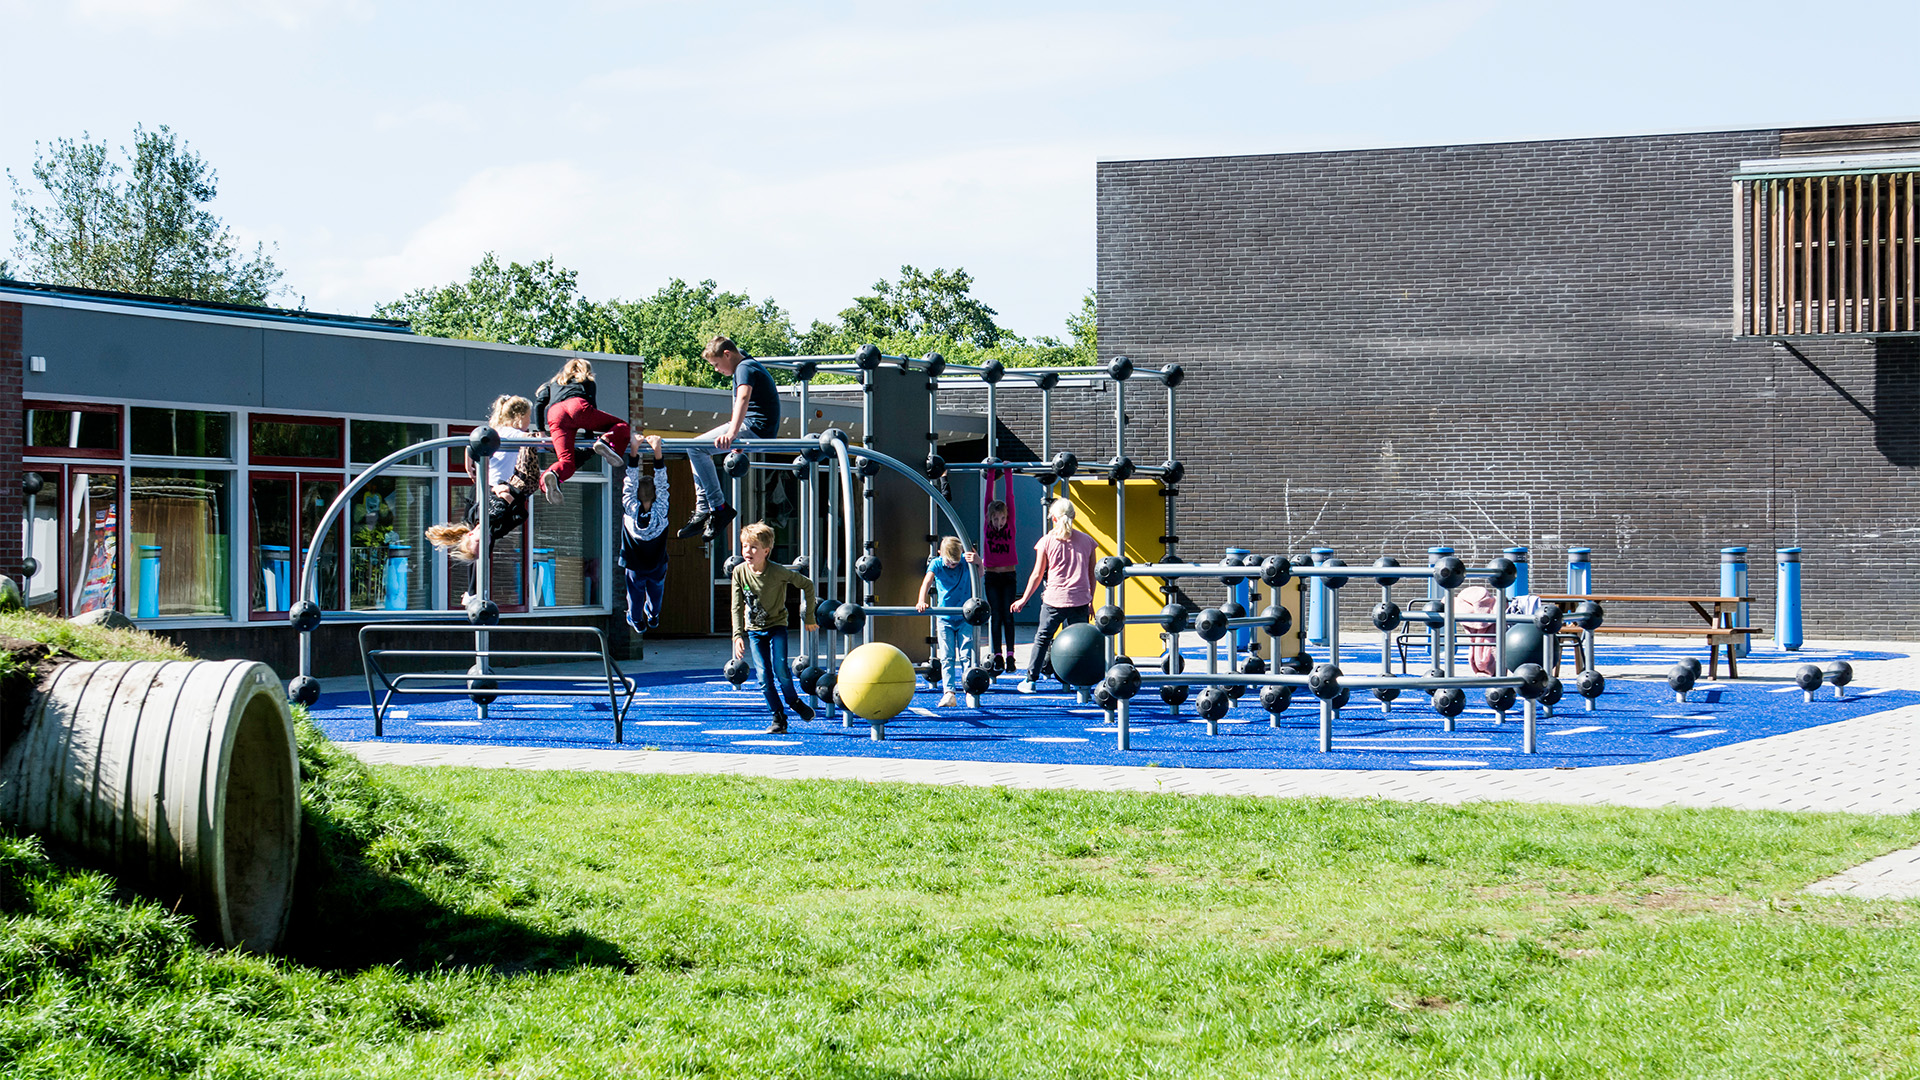 Children playing on a modern playground structure under a partly cloudy sky. The playground features various climbing and balancing apparatuses on a blue rubberized surface. The area is adjacent to a dark brick building with large windows and greenery nearby.